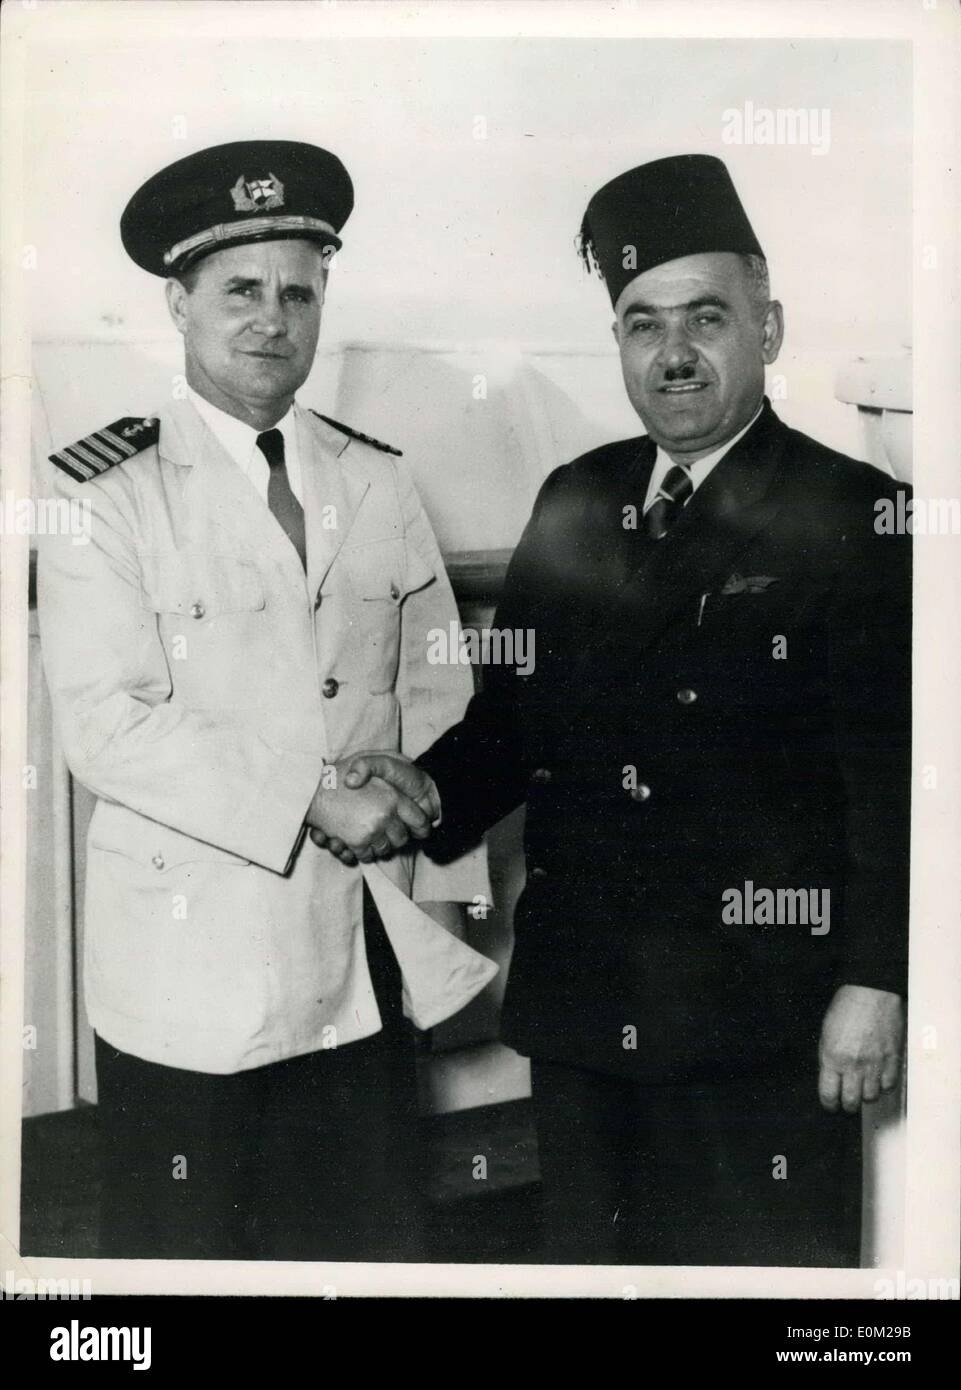 Mar. 09, 1953 - Two Heroes of the Sea Left Carlsen of the ''Enterprise'' - Baltaji of the ''Chaepol Ion'': Two heroes of the sea met at Lebanese port recently. They were Captain Carlsen of the ''Flying Enterprise'' fame - and Rad wan Baltaji the port pilot who made three trips to the sinking liner ''Champollion'' in heavy seas when she ran aground off the Lebanese coast last December. He rescued about 50 people on each of his trips in spite of seas which were getting heavier each time Stock Photo